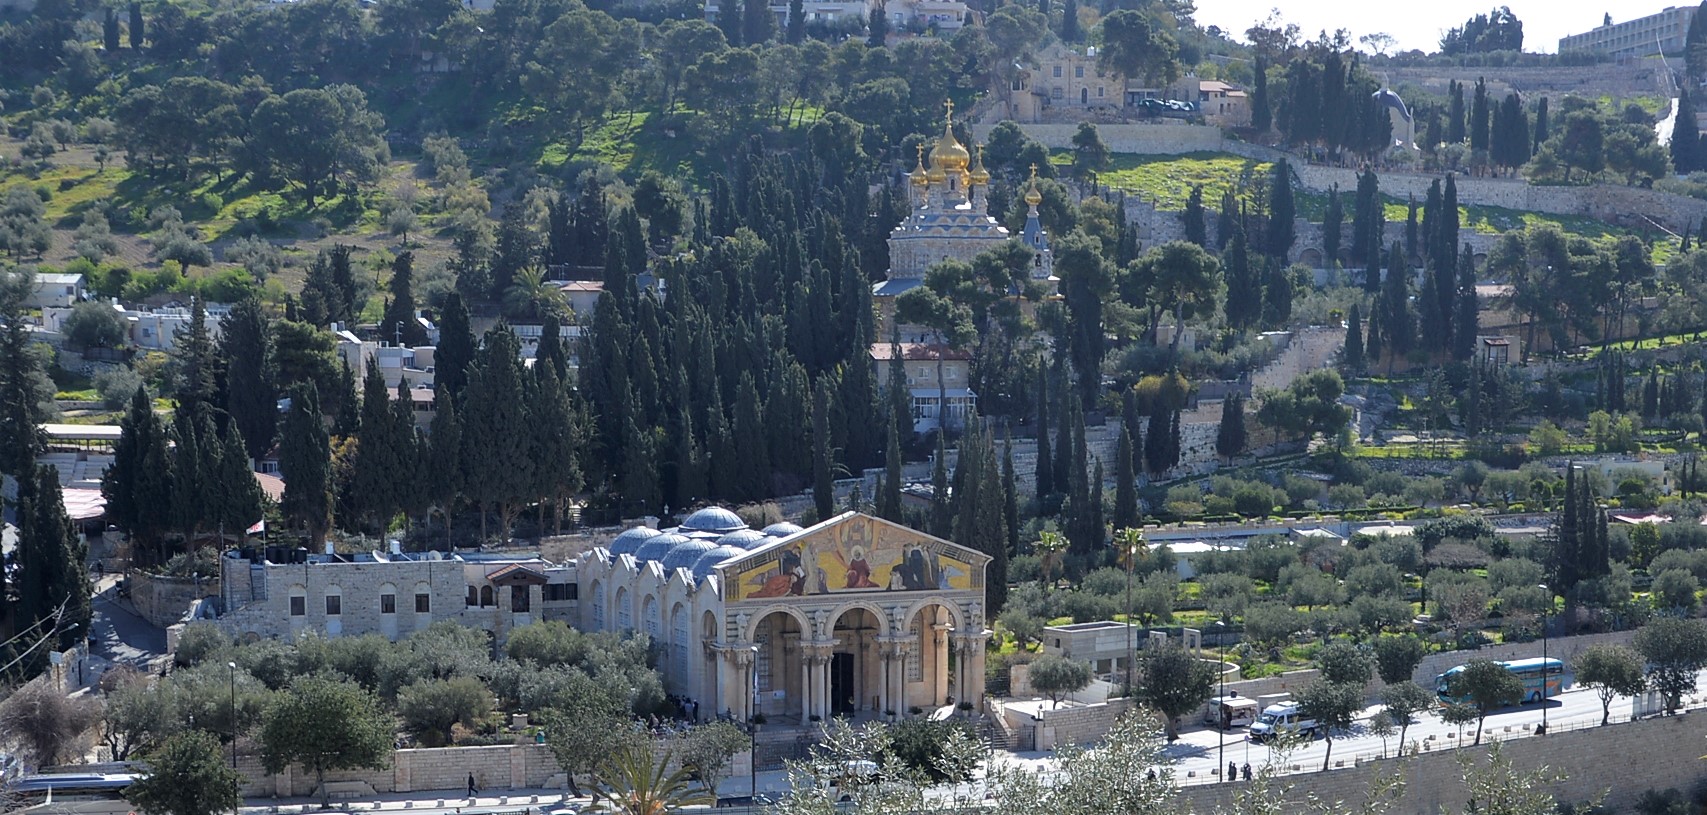 But first a look back at the Mount of Olives: The Church of All Nations located at the traditional site of the Garden of Gethsemane, the onion dome spires of the Russian Orthodox Church of Mary Magdalene, and in the far corner, Dominus Flevit.